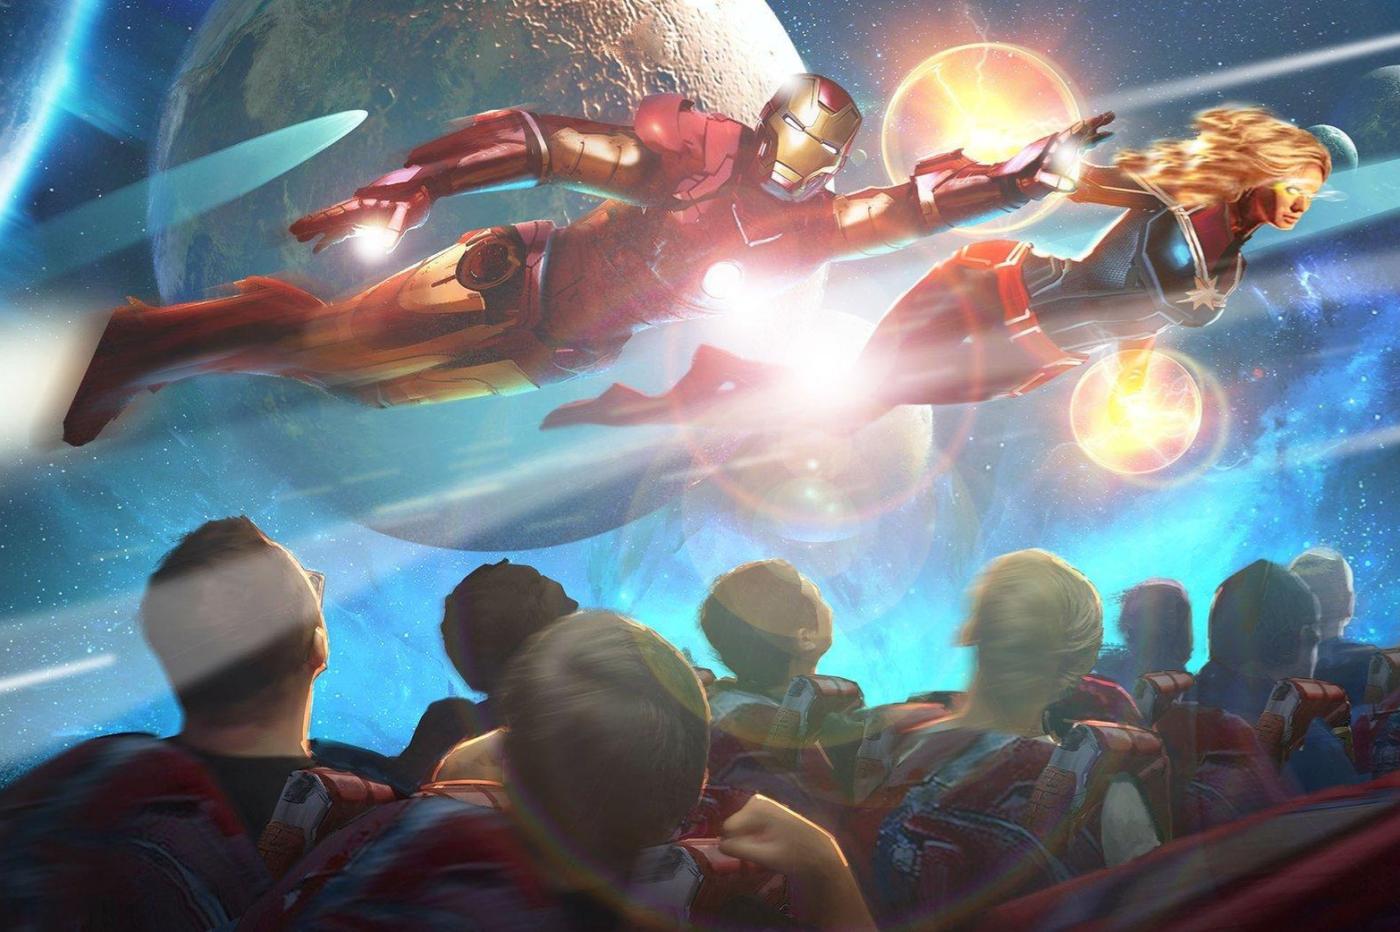 Concept art of future Iron Man attraction showing passengers in a train car next to Iron Man and Captain Marvel